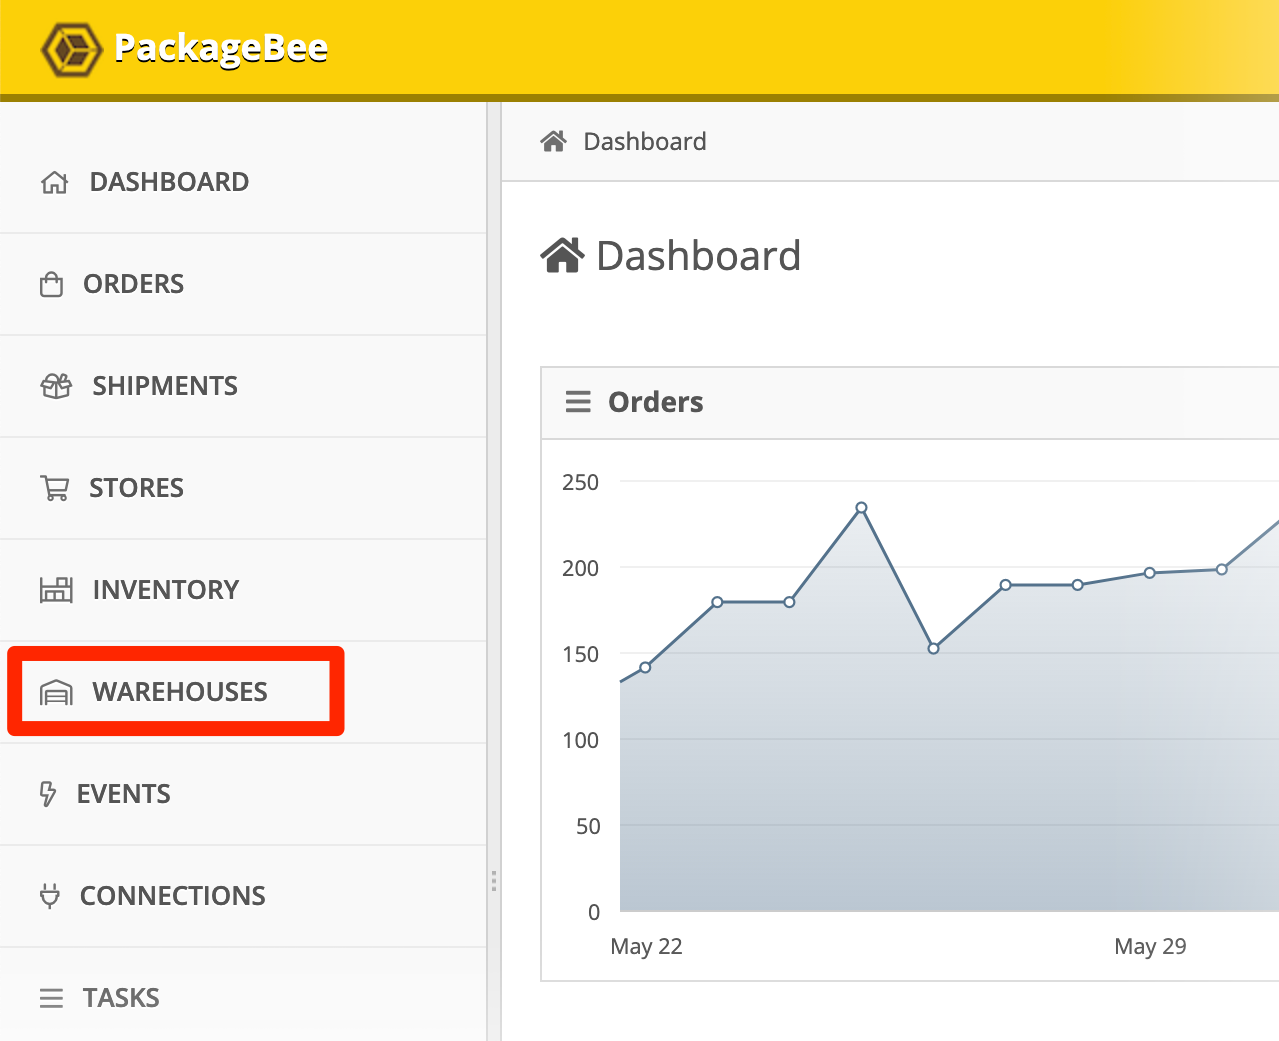 In the PackageBee Dashboard, click Warehouses.